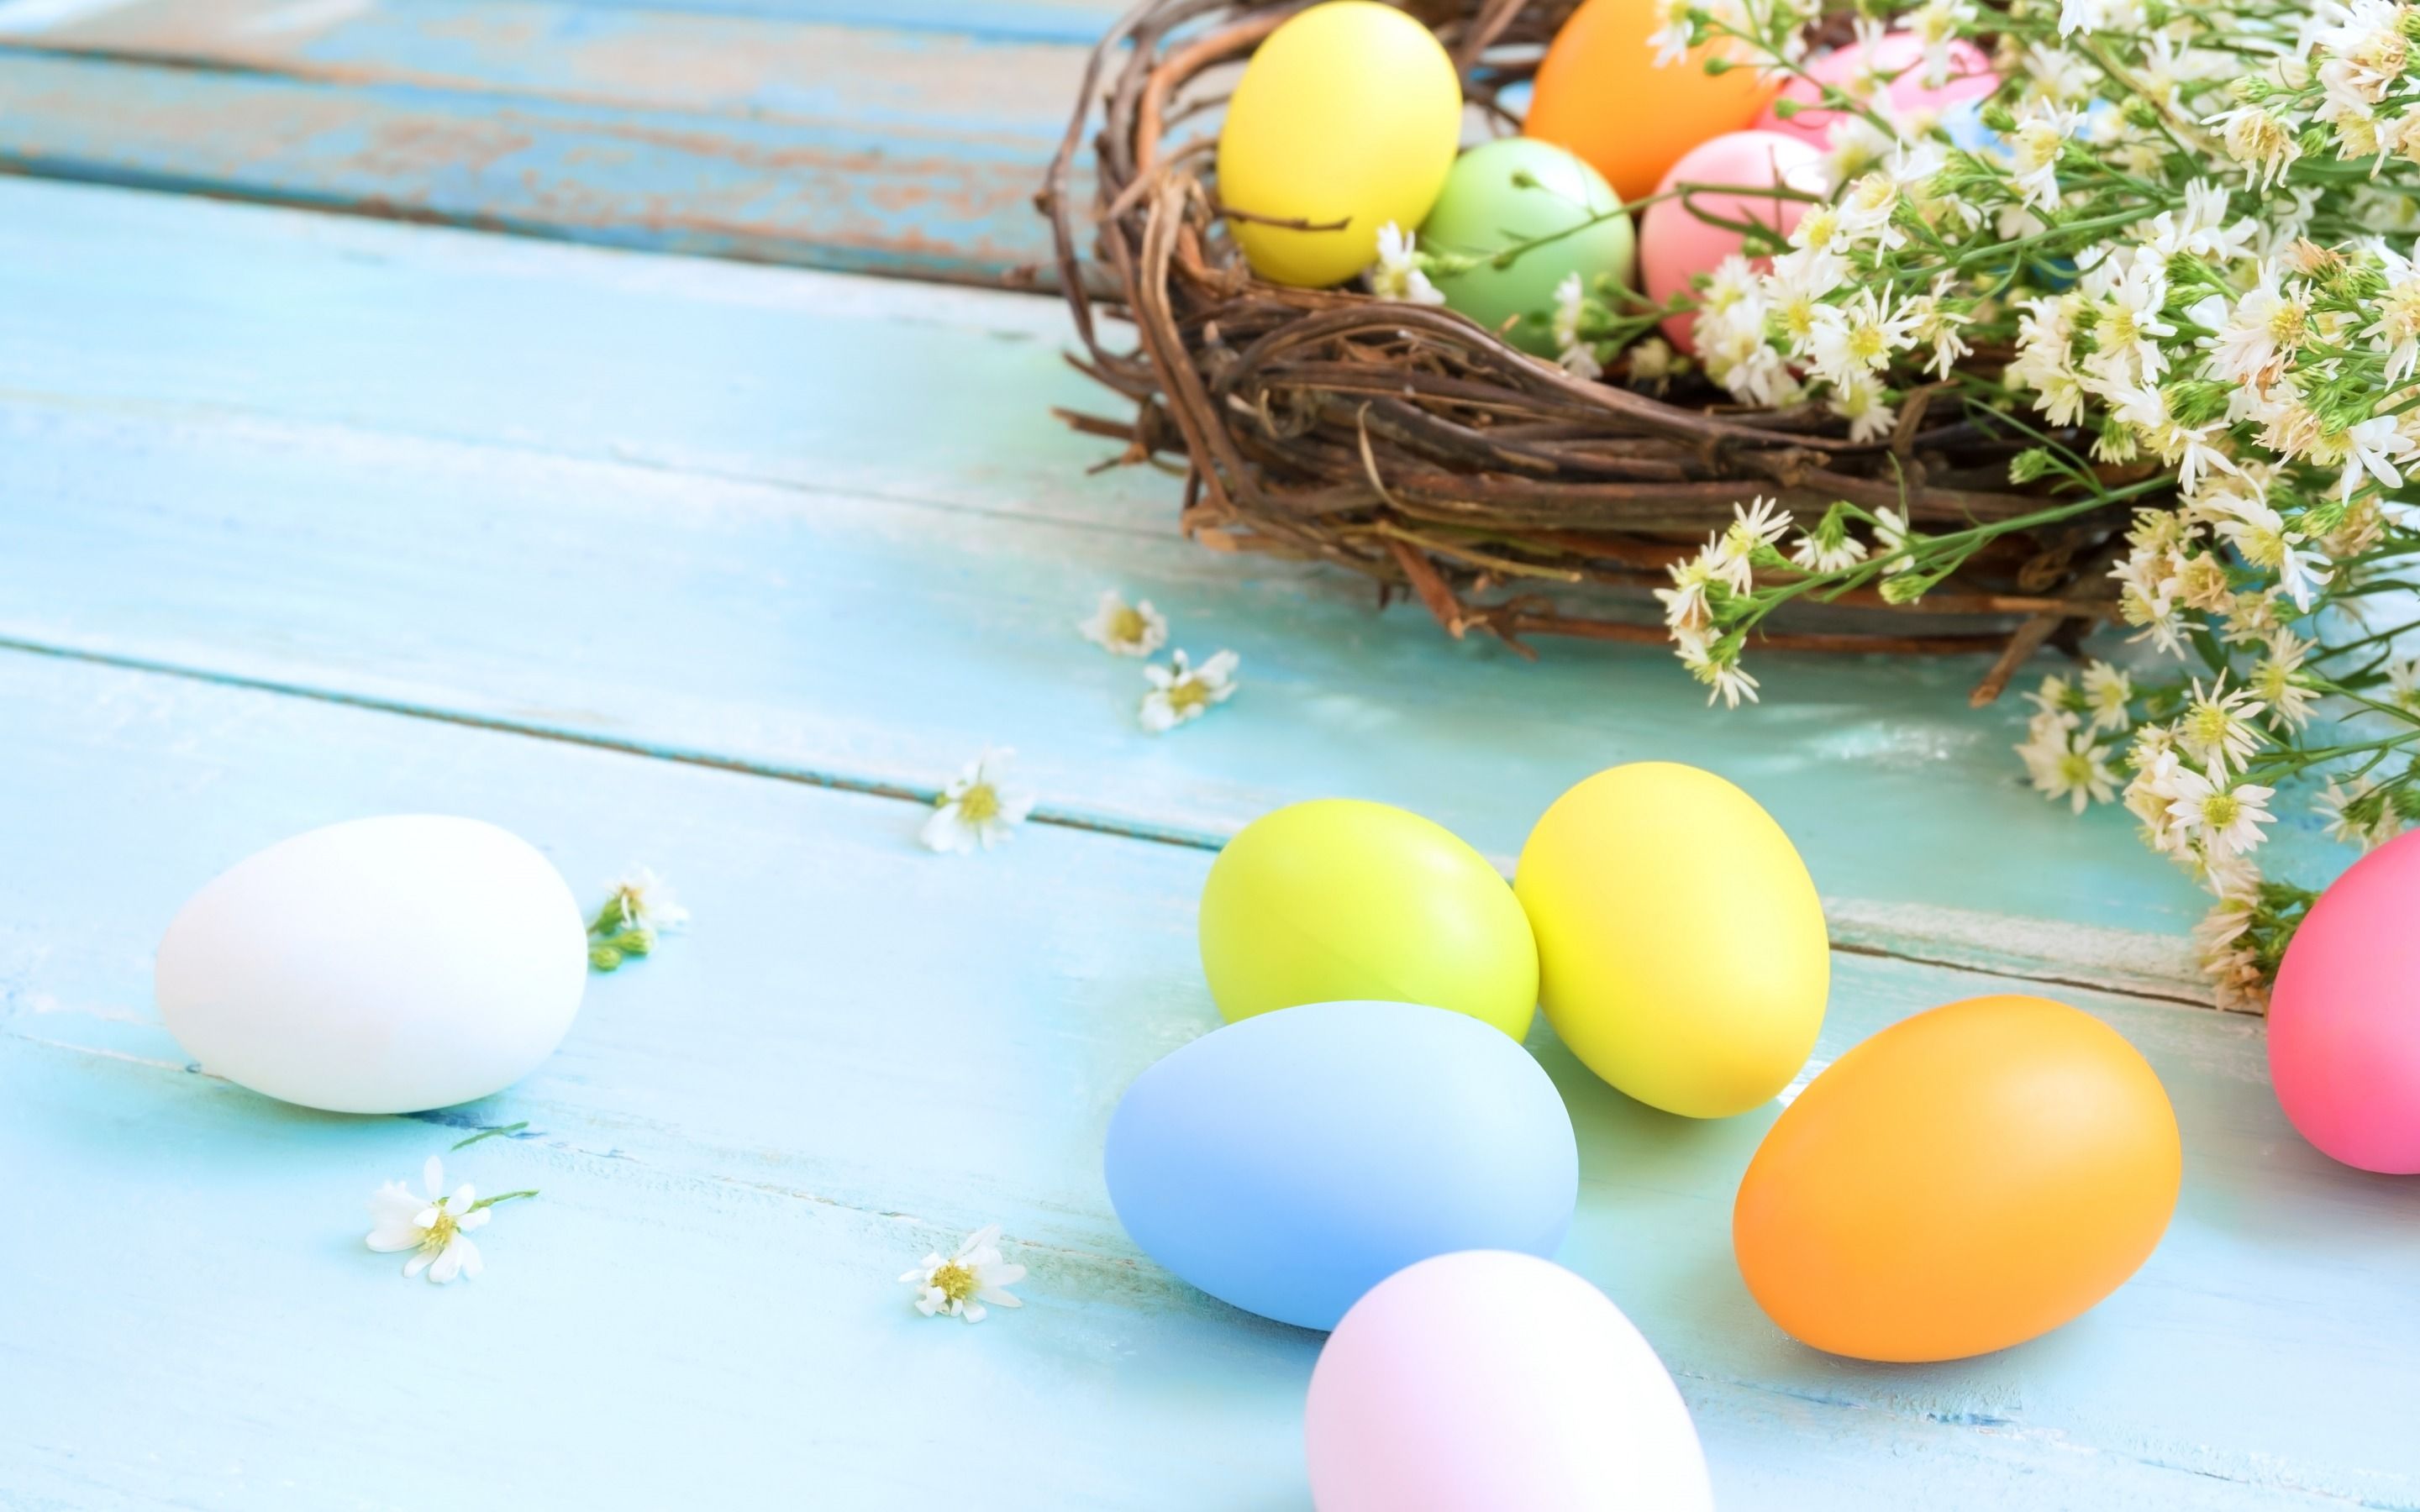 Download wallpaper spring, easter eggs, nest, easter decoration, spring flowers, colorful eggs for desktop with resolution 2880x1800. High Quality HD picture wallpaper